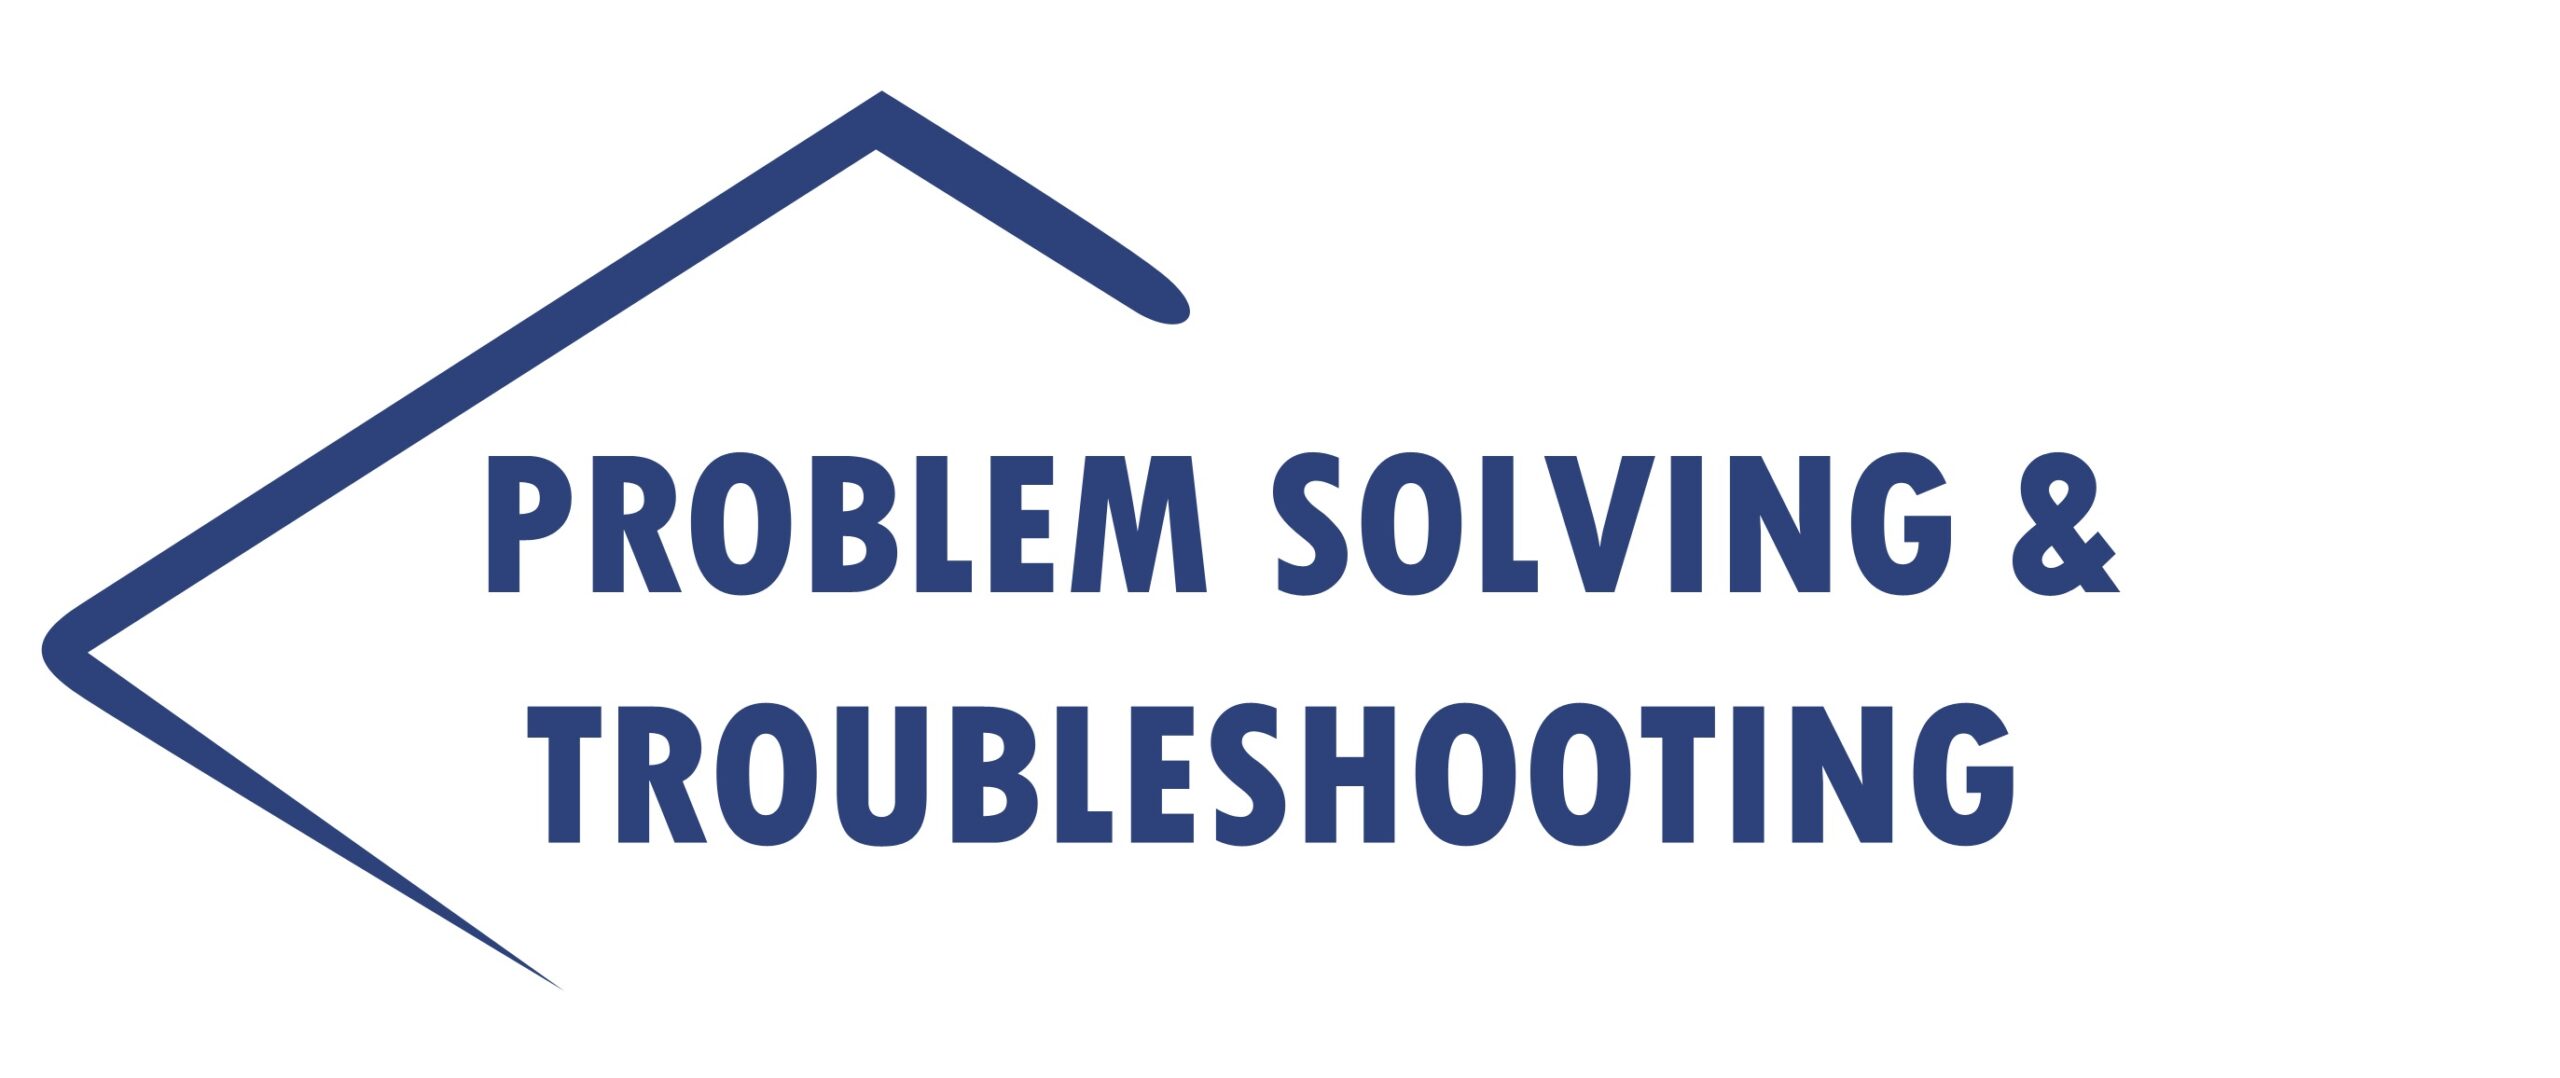 Problem Solving & Troubleshooting Class